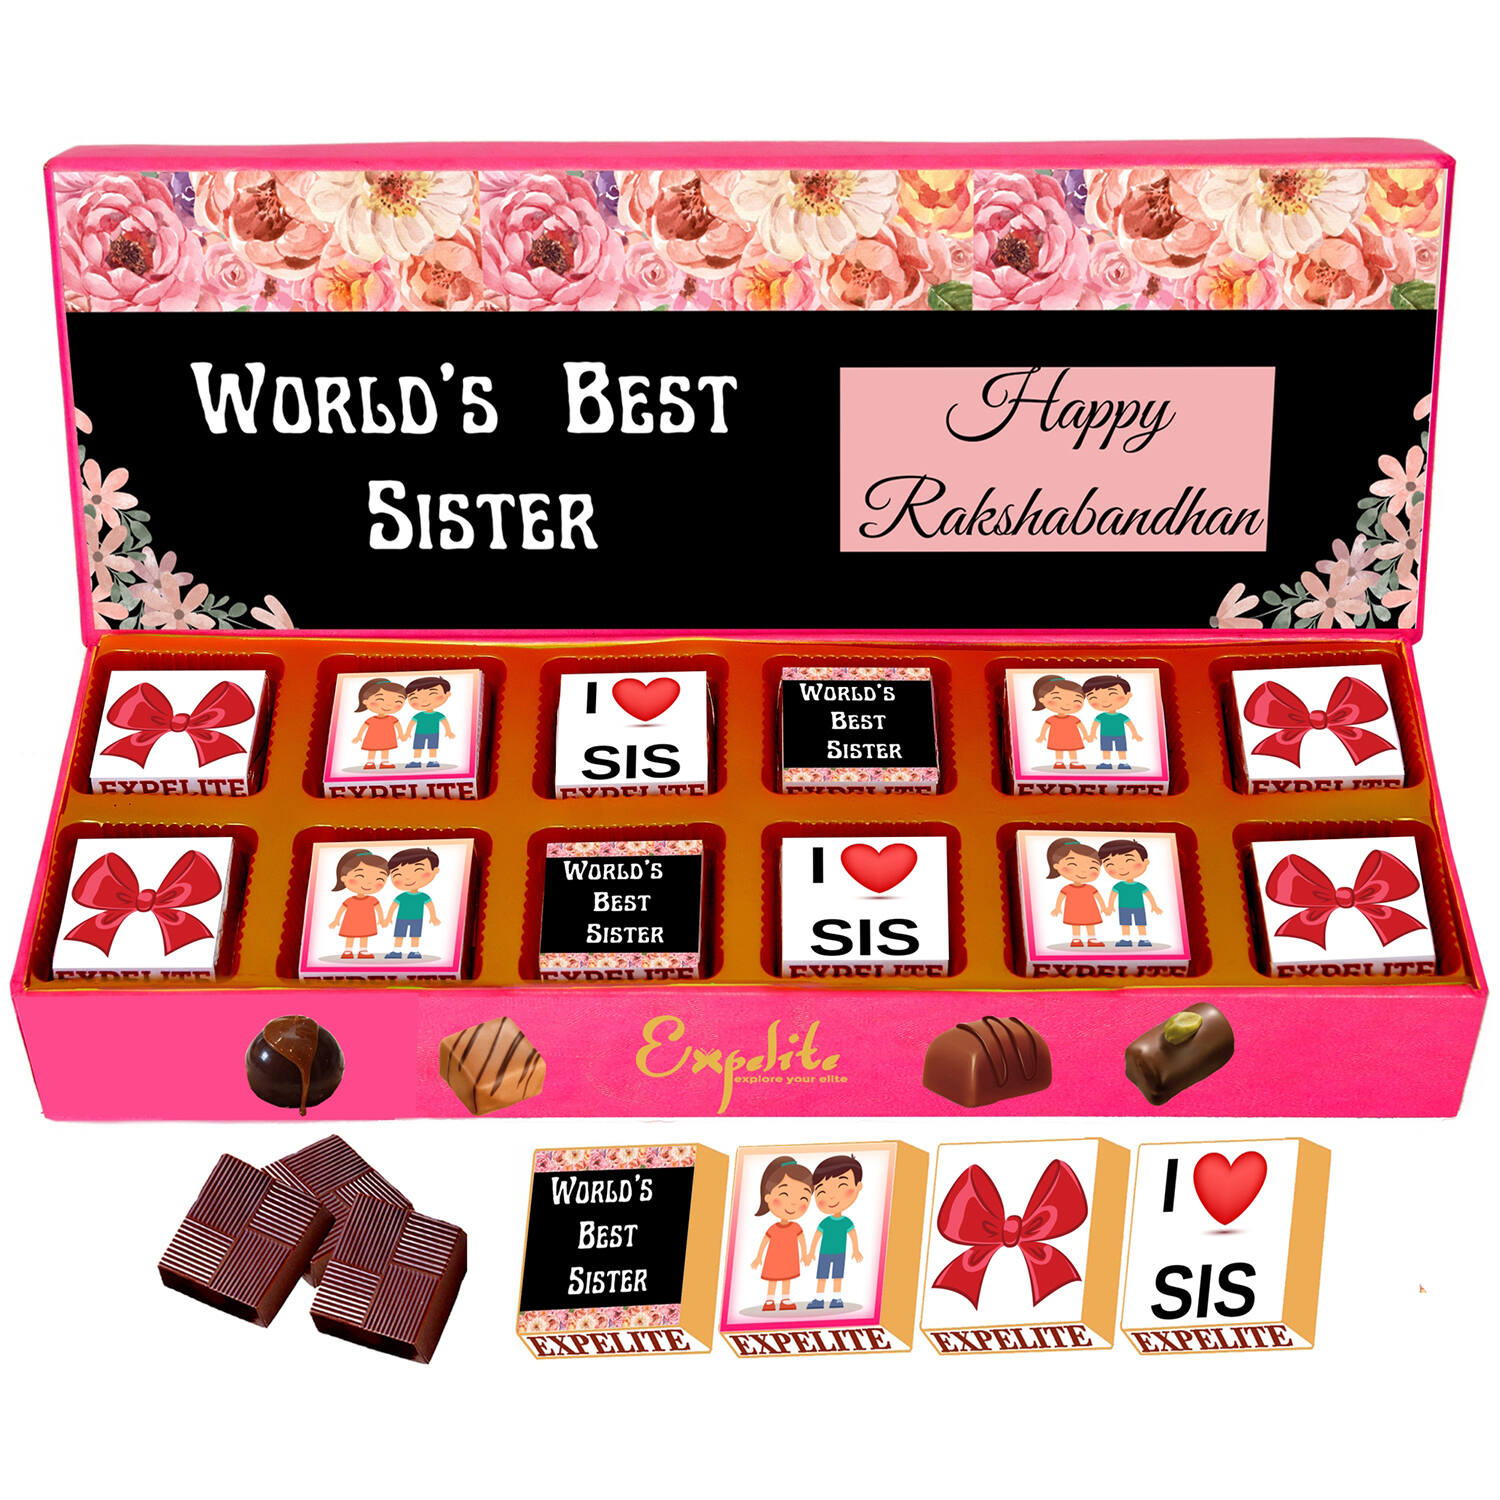 Best Rakhi Gift Ideas Perfectly Suitable For Your Married Sister - Winni -  Celebrate Relations